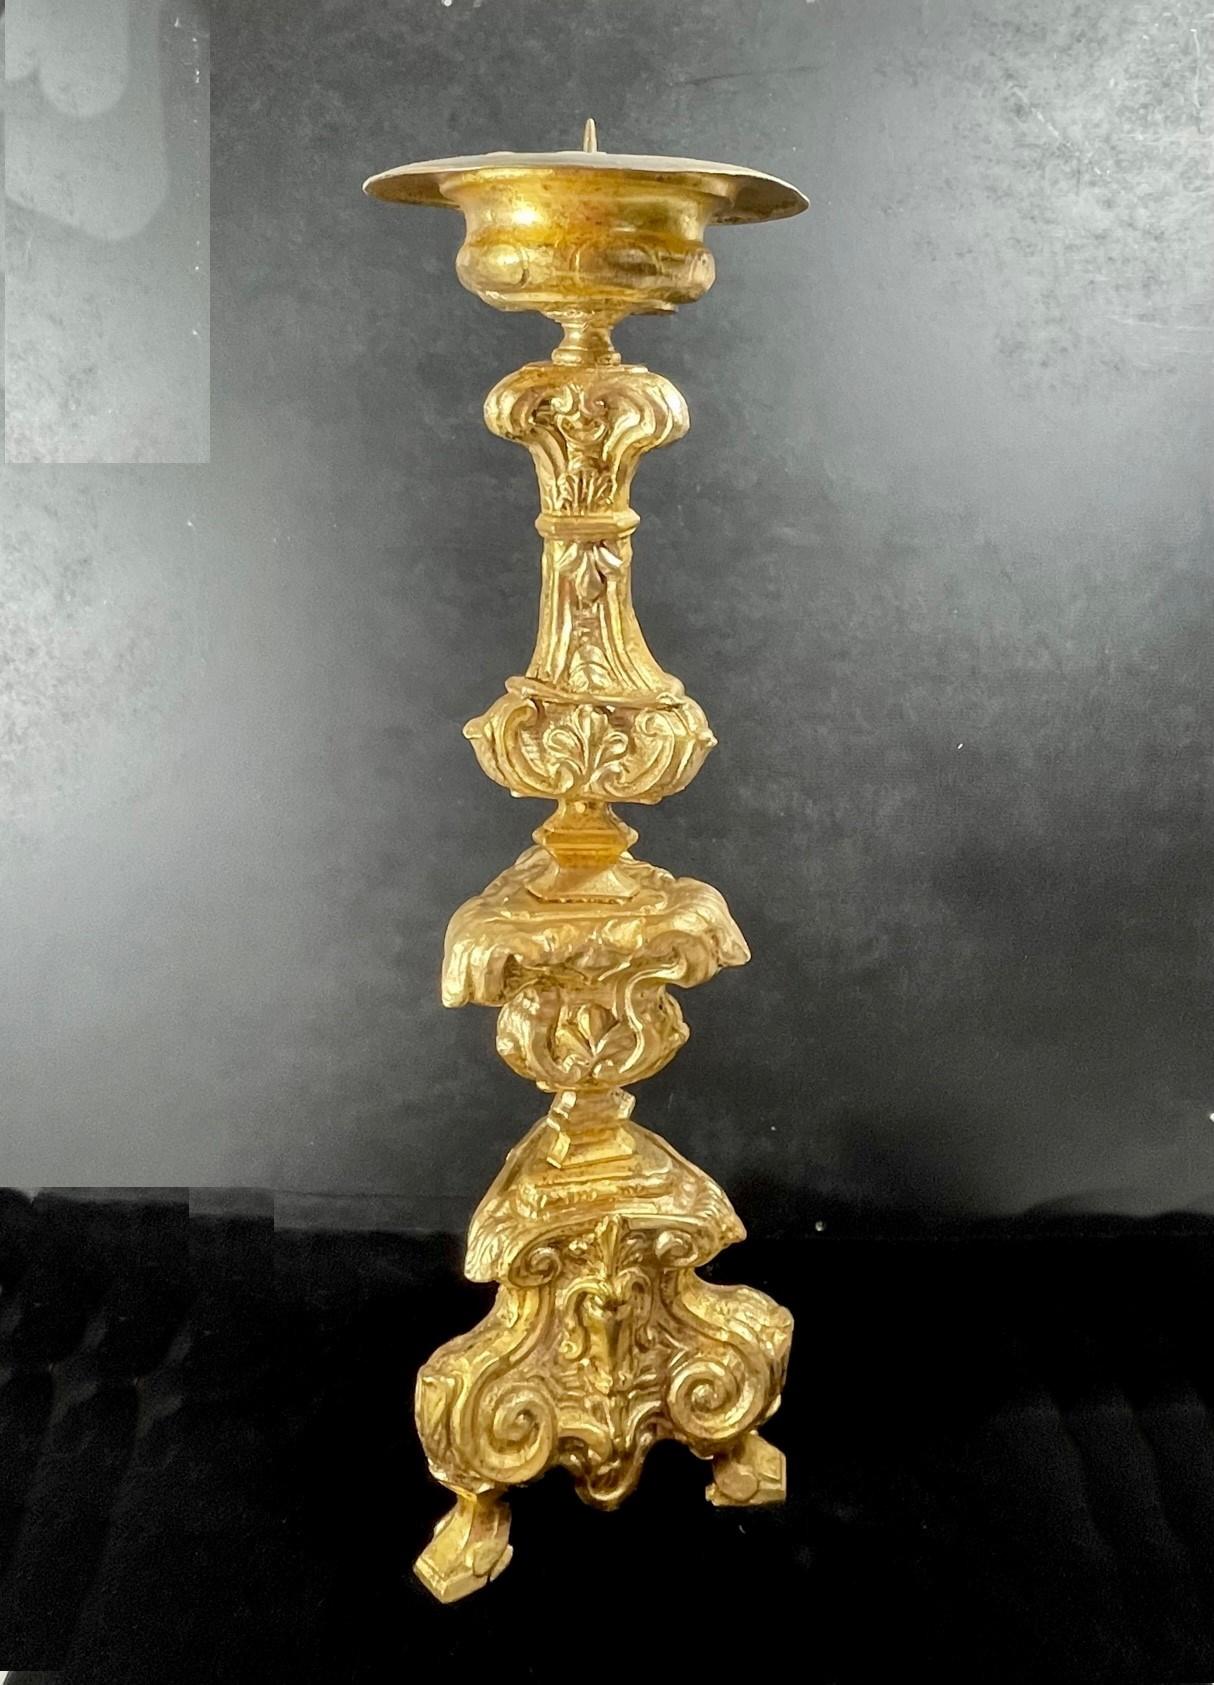 Italian 18th century Baroque gilt copper candlestick.

Rare Italian Baroque candlestick from the third quarter of the 18th century. It is a gilded copper body with a dished top on a baluster stem with scrolls and rocaills on a triform base. This